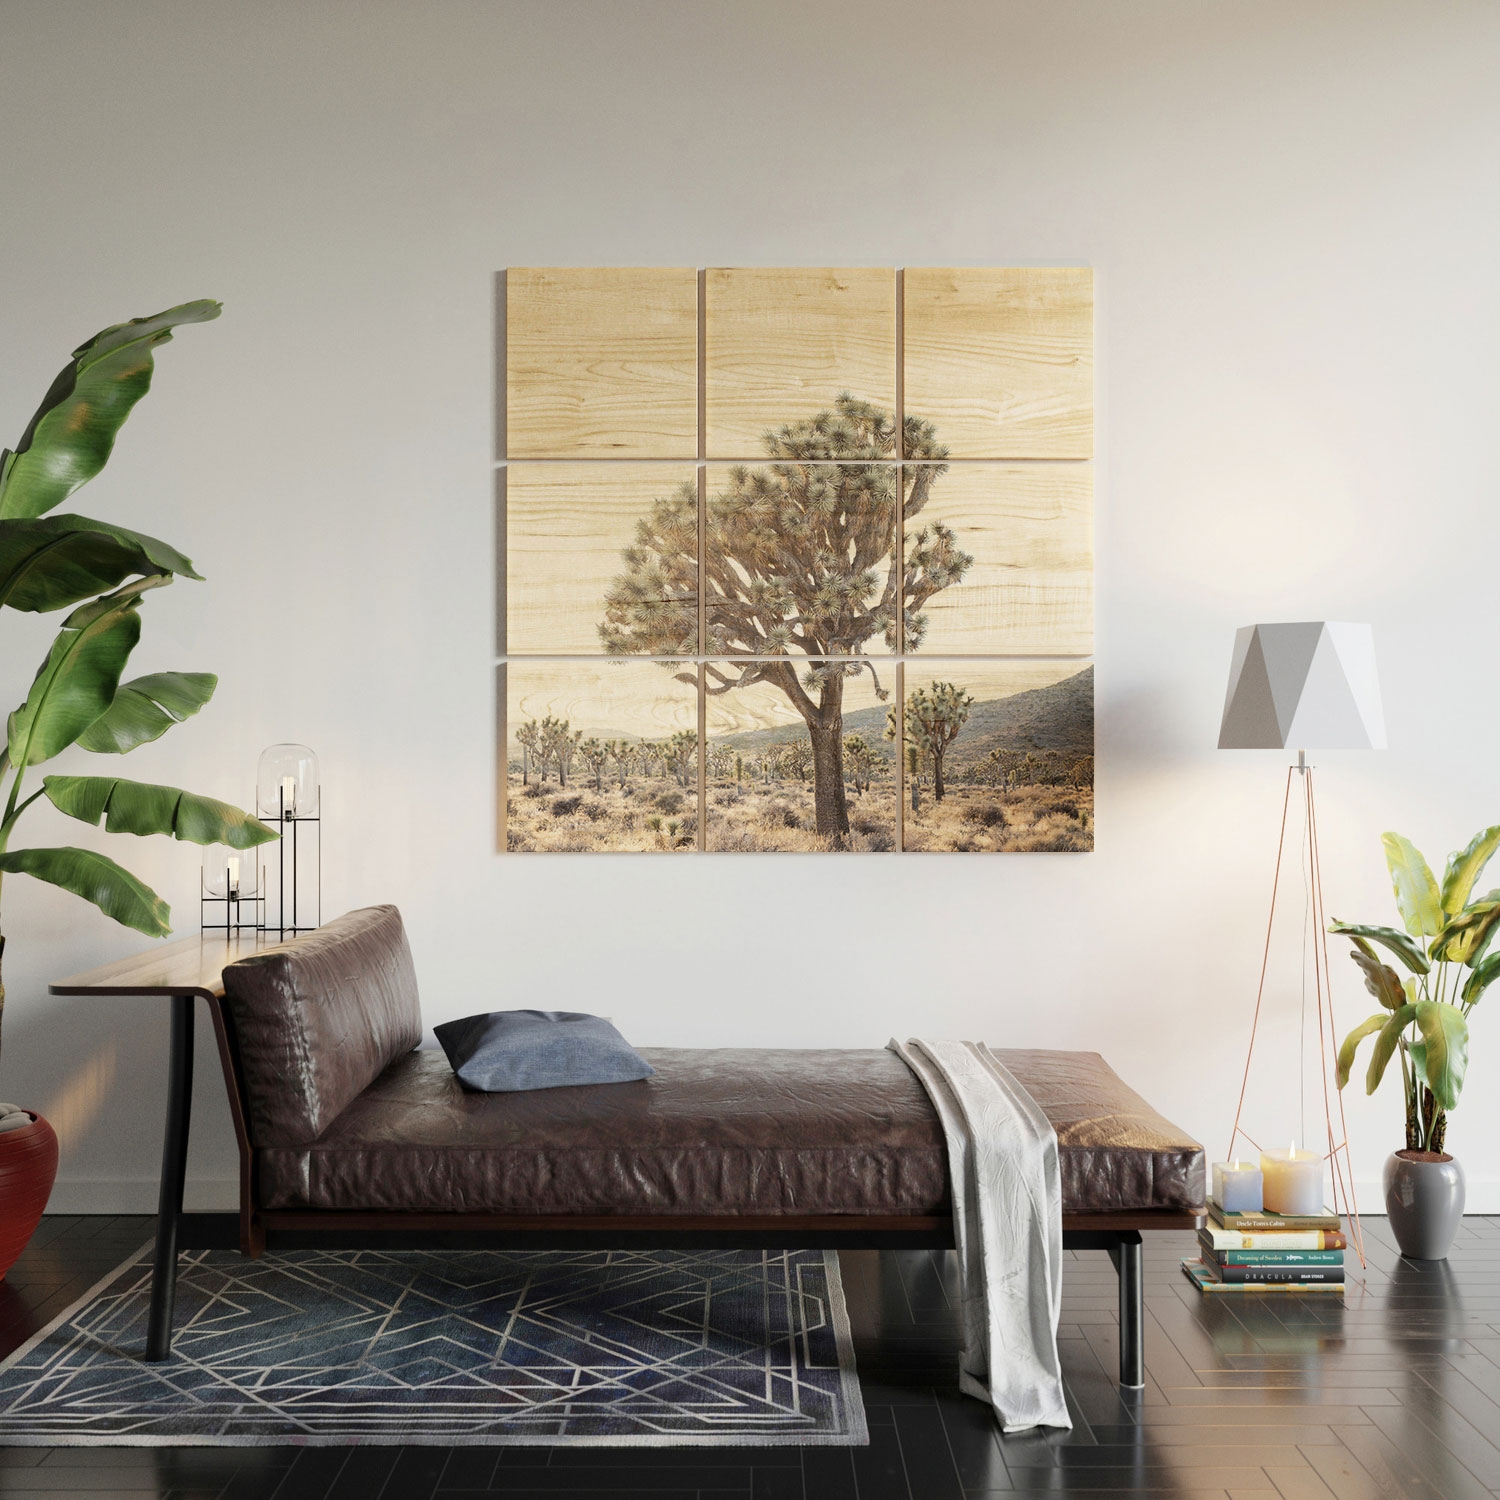 Desert Light by Bree Madden - Wood Wall Mural3' X 3' (Nine 12" Wood Squares) - Image 1